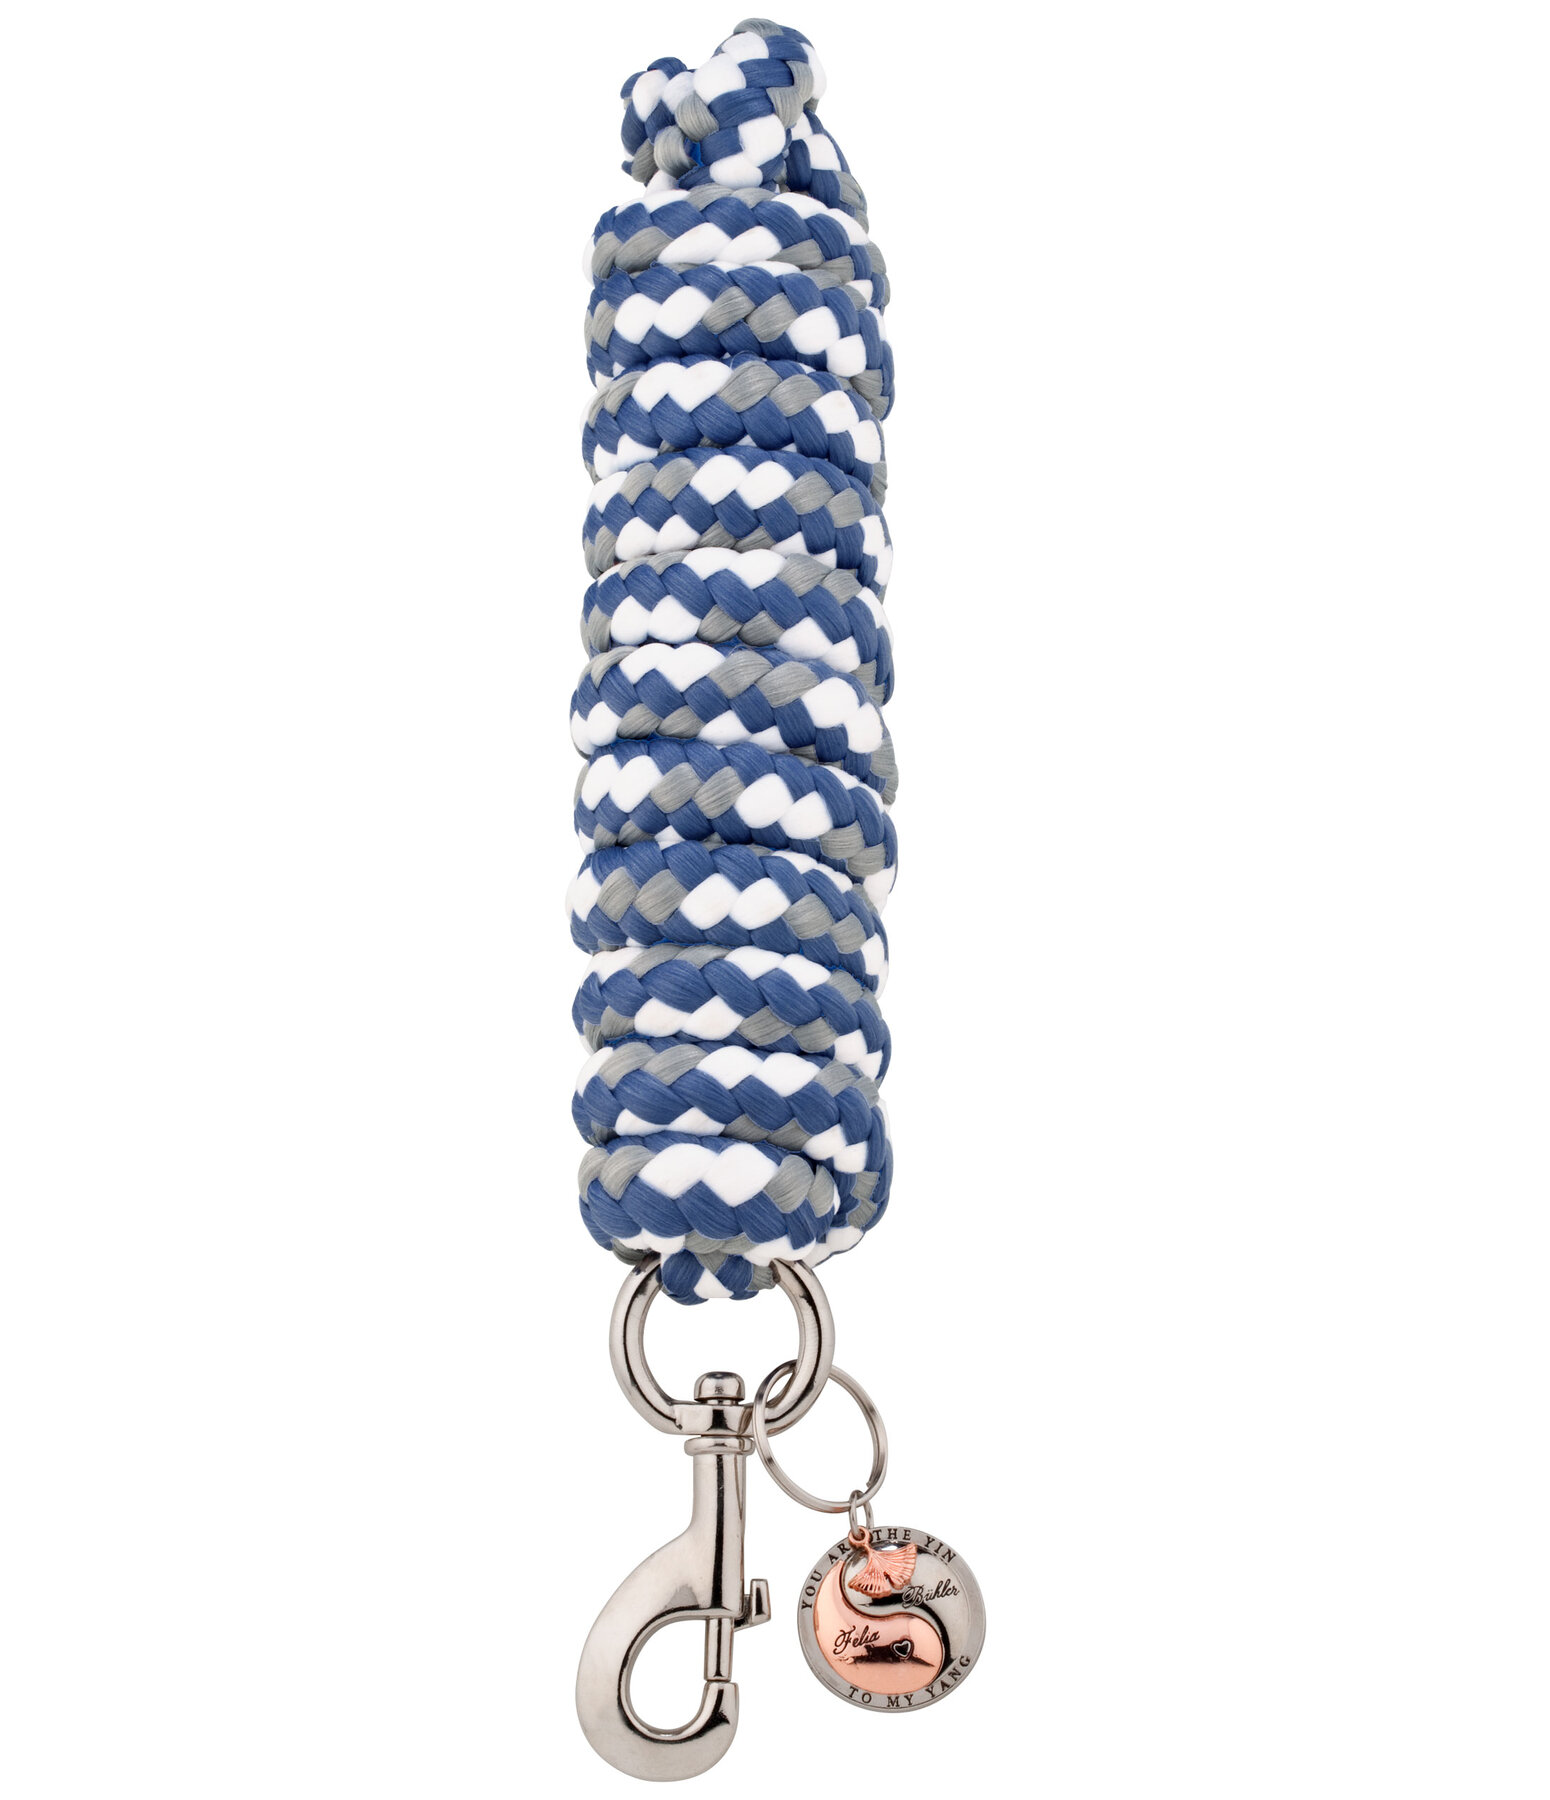 Yin & Yang Lead Rope with Snap Hook